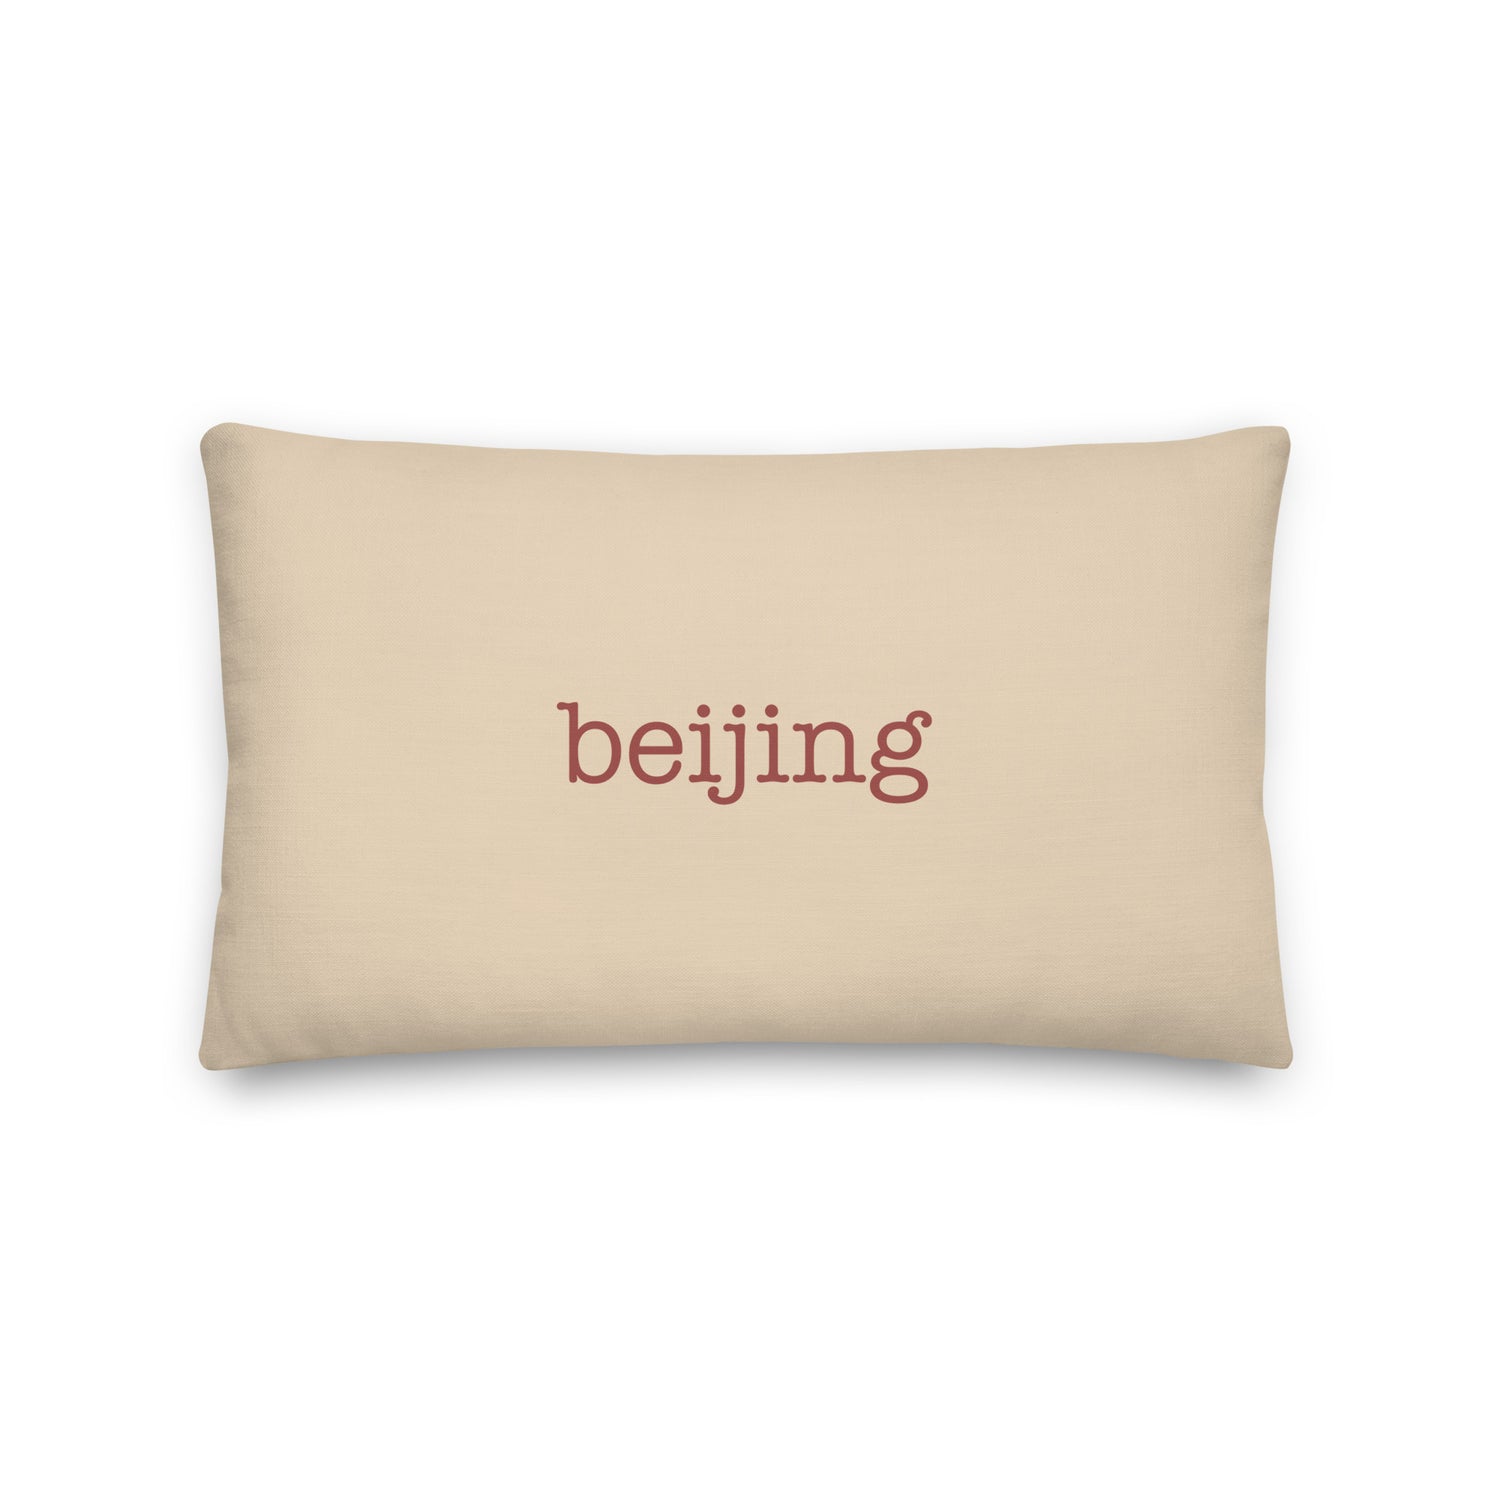 Beijing China Pillows and Blankets • PEK Airport Code